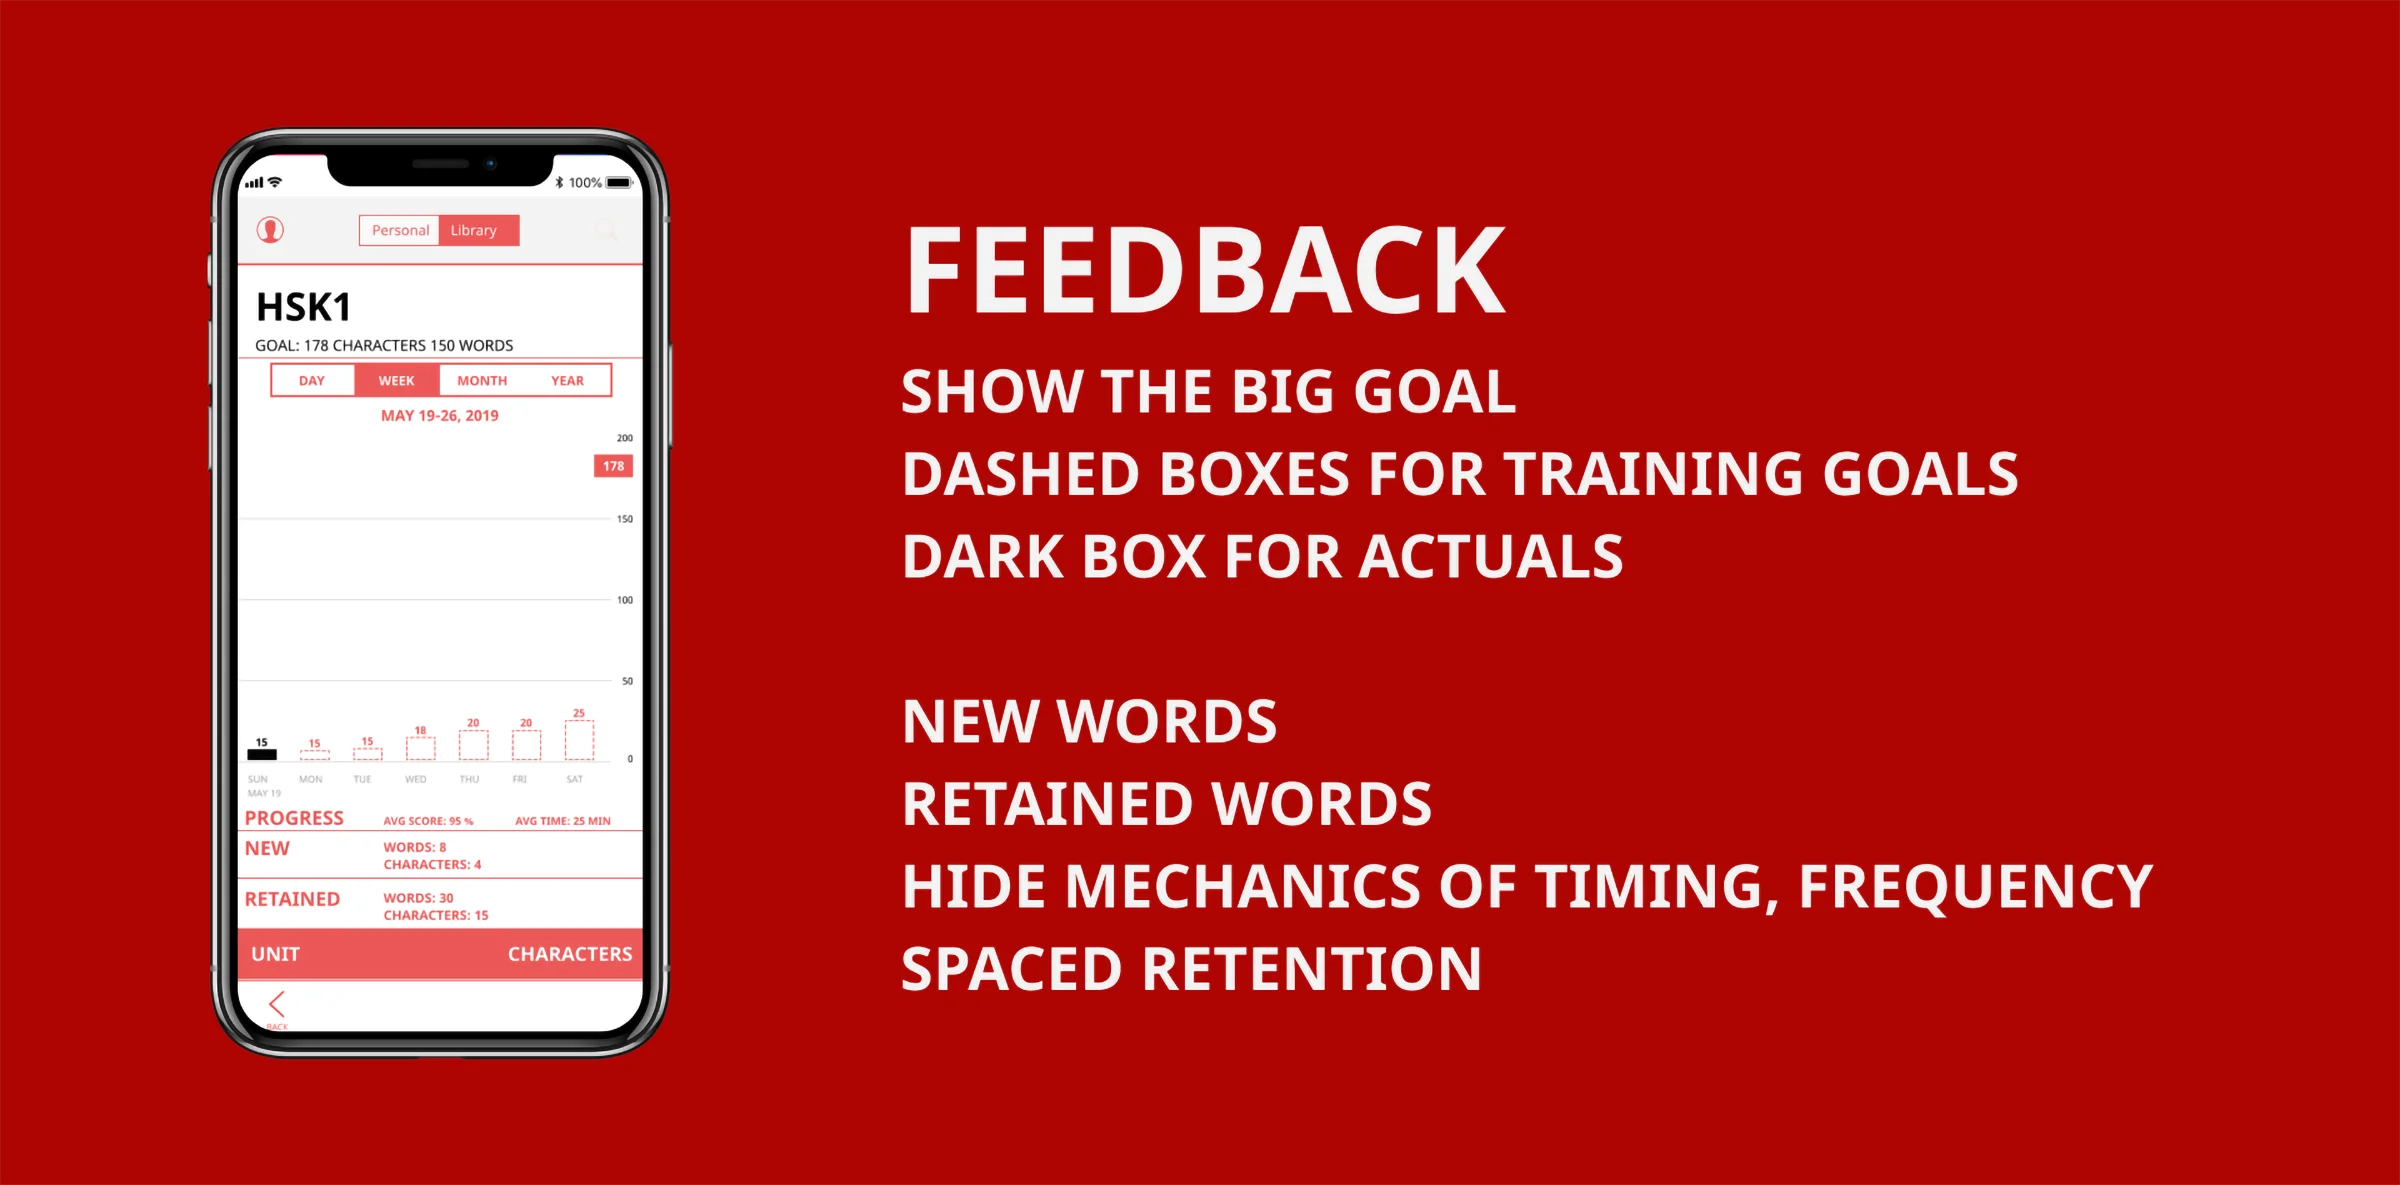 Feedback. Shot the big goal, dashed boxes for training, dark for actuals. New words, retained words, hide mechanics of timing, frequency, spaced retention.